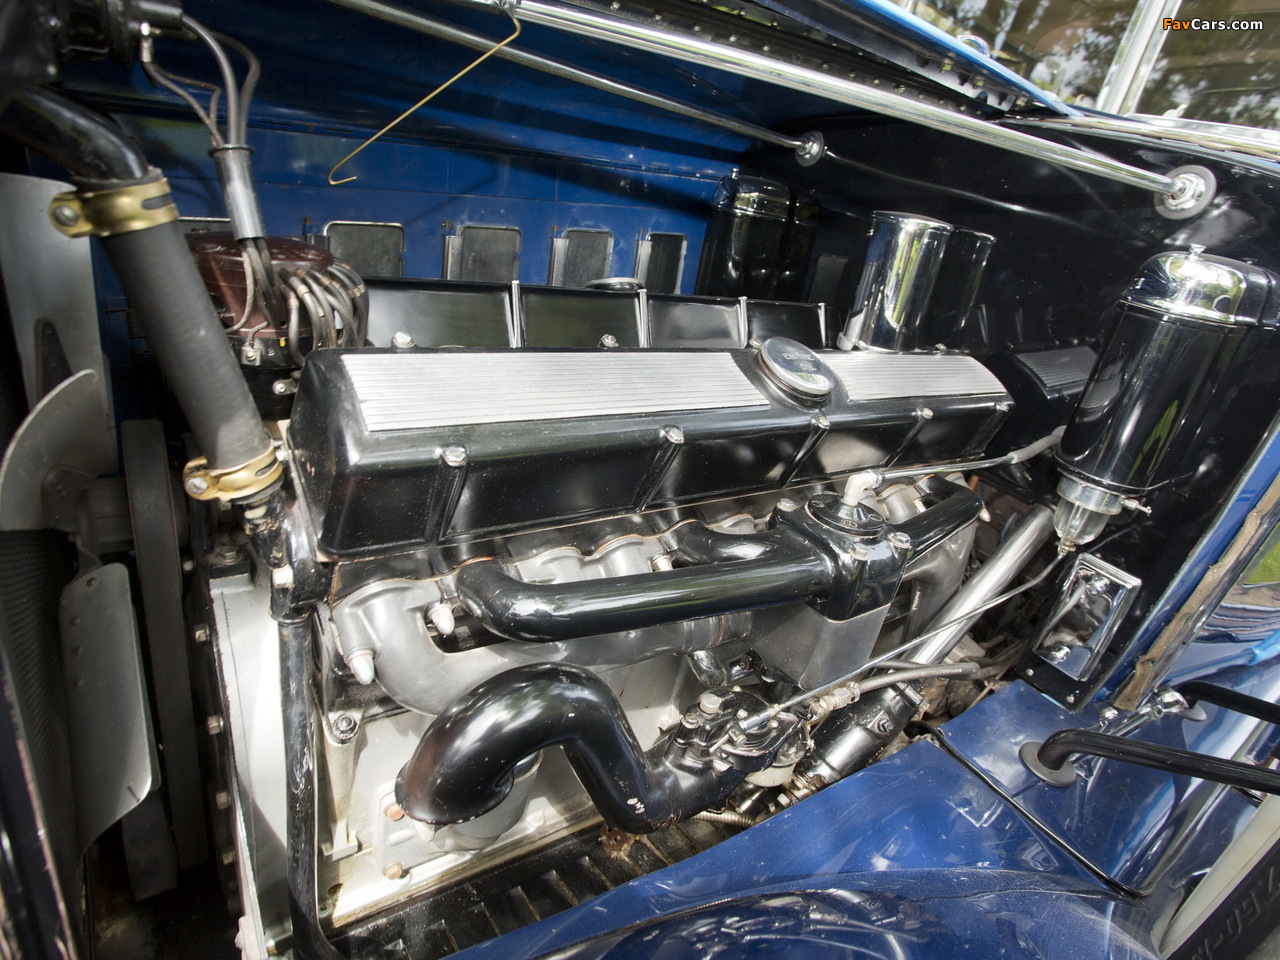 Cadillac V16 All-Weather Phaeton by Fleetwood 1930 pictures (1280 x 960)